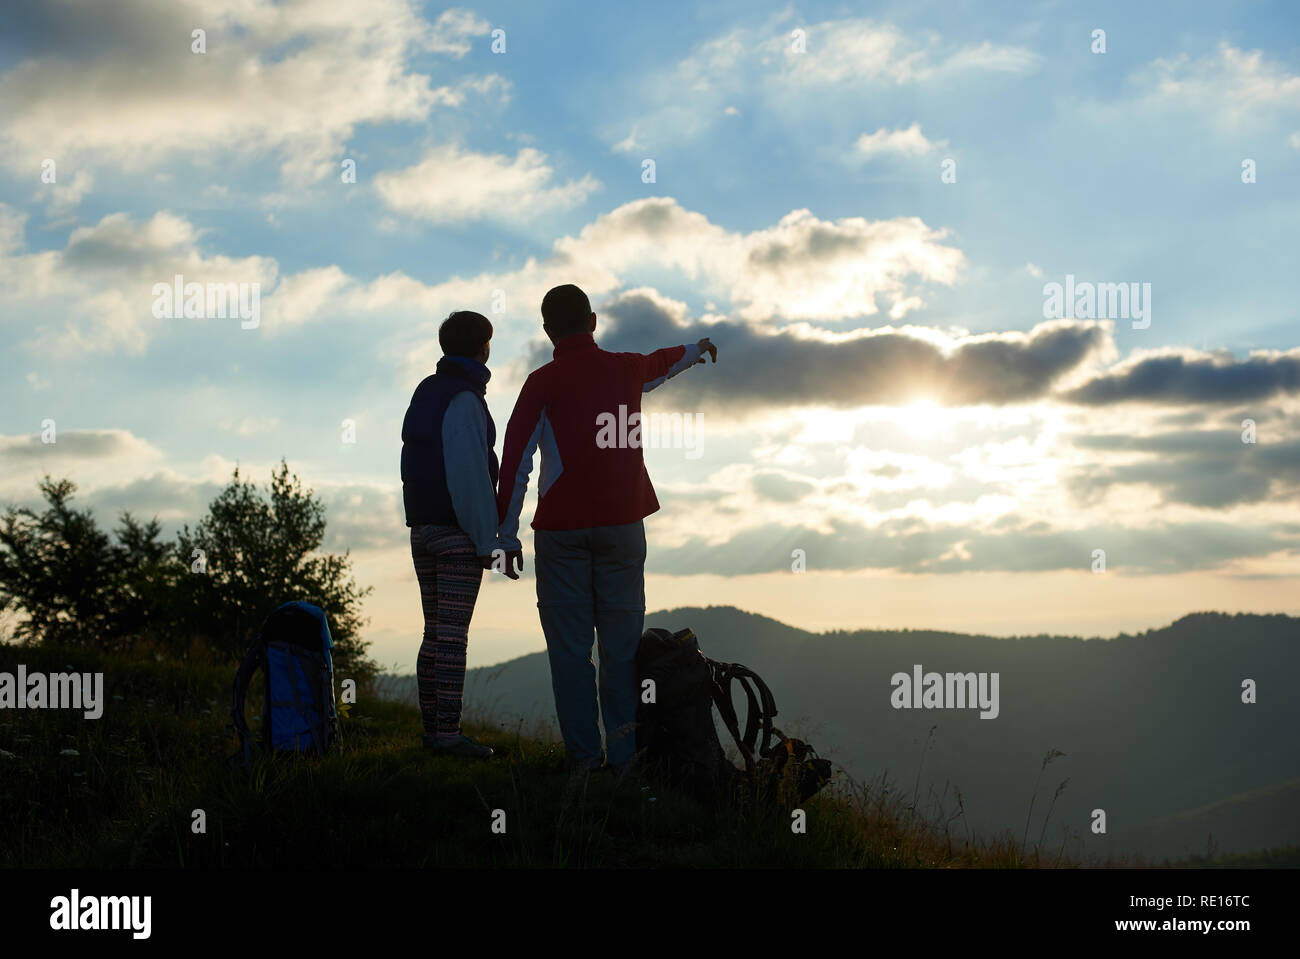 Silhouette of two tourists are standing on top of the mountain holding hands near backpacks against the backdrop of mountains and cloudy sky at sunset. Guy showing his hand in the distance. Rear view Stock Photo